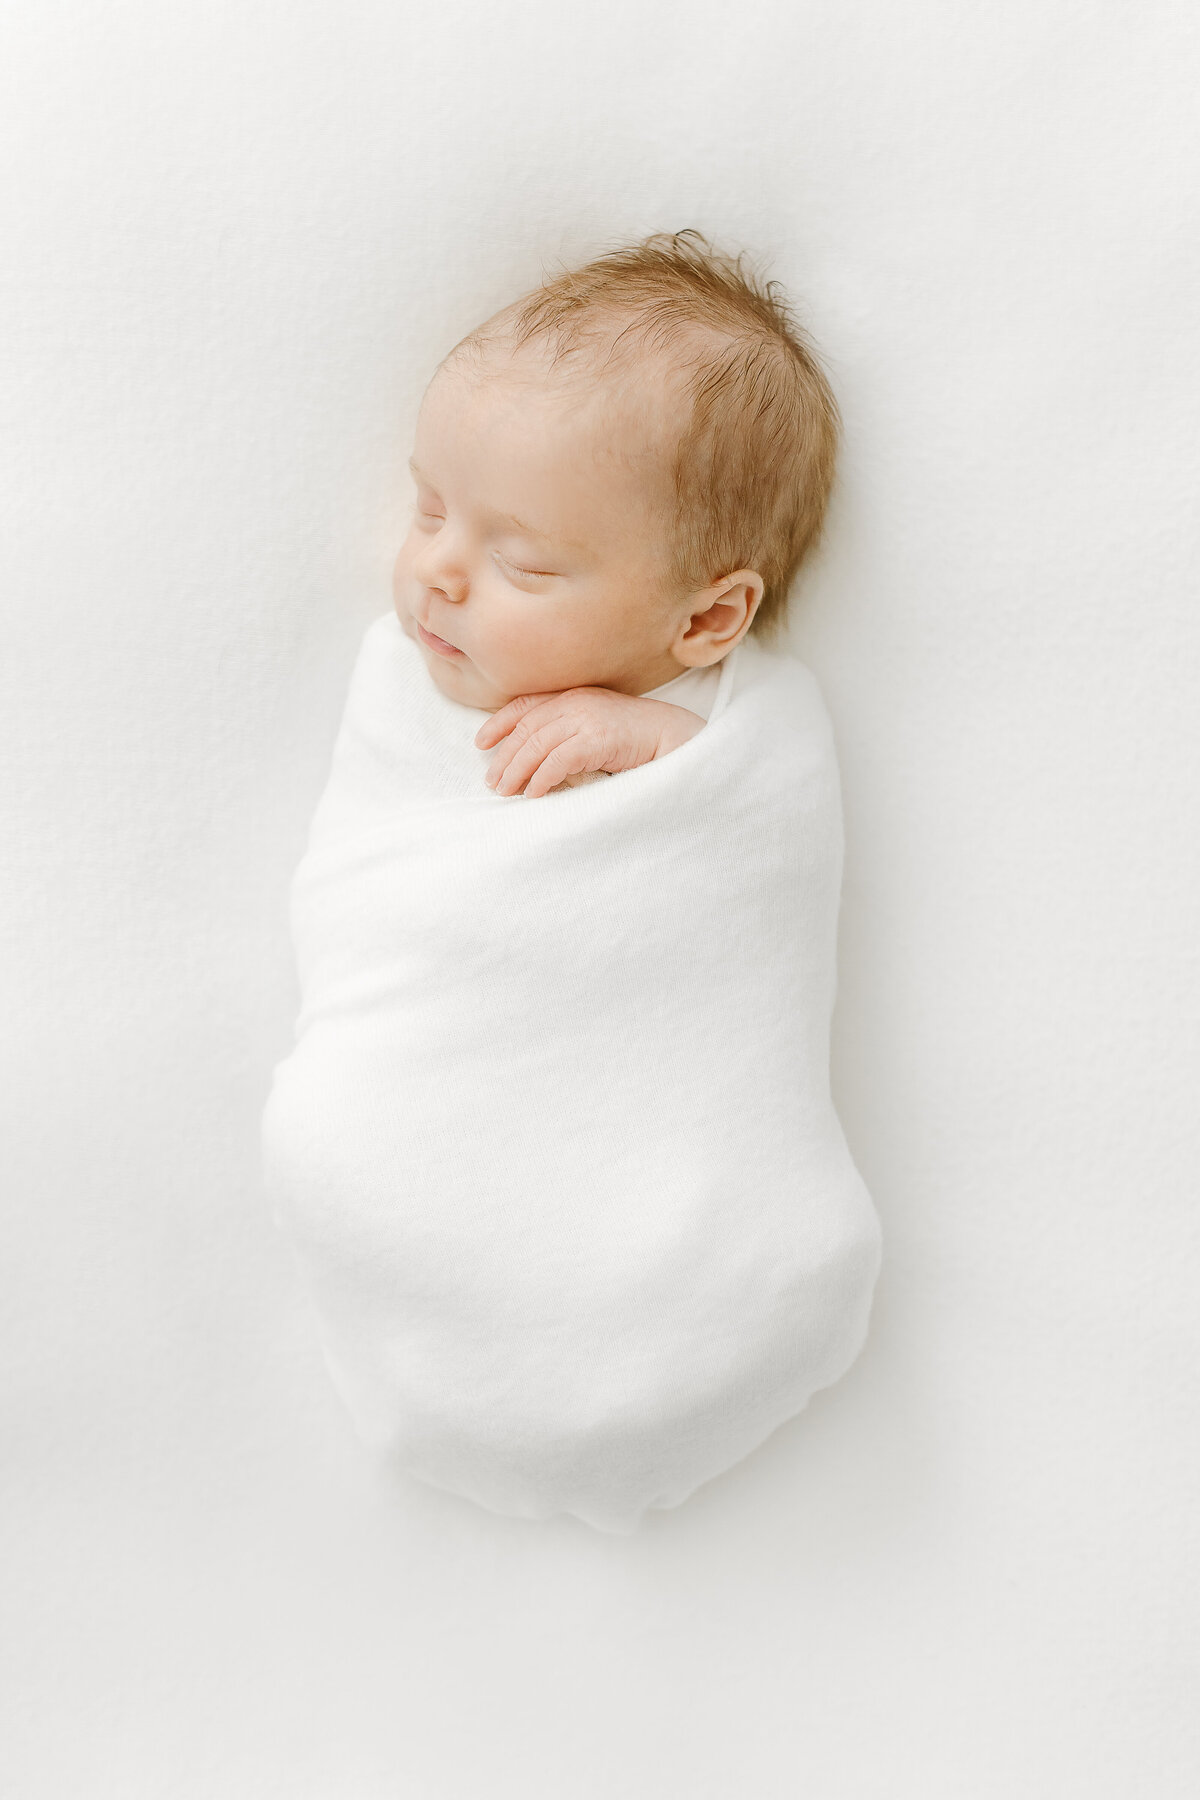 Baby swaddled in white blanket sleeping at a Northern Virginia Newborn Photography session